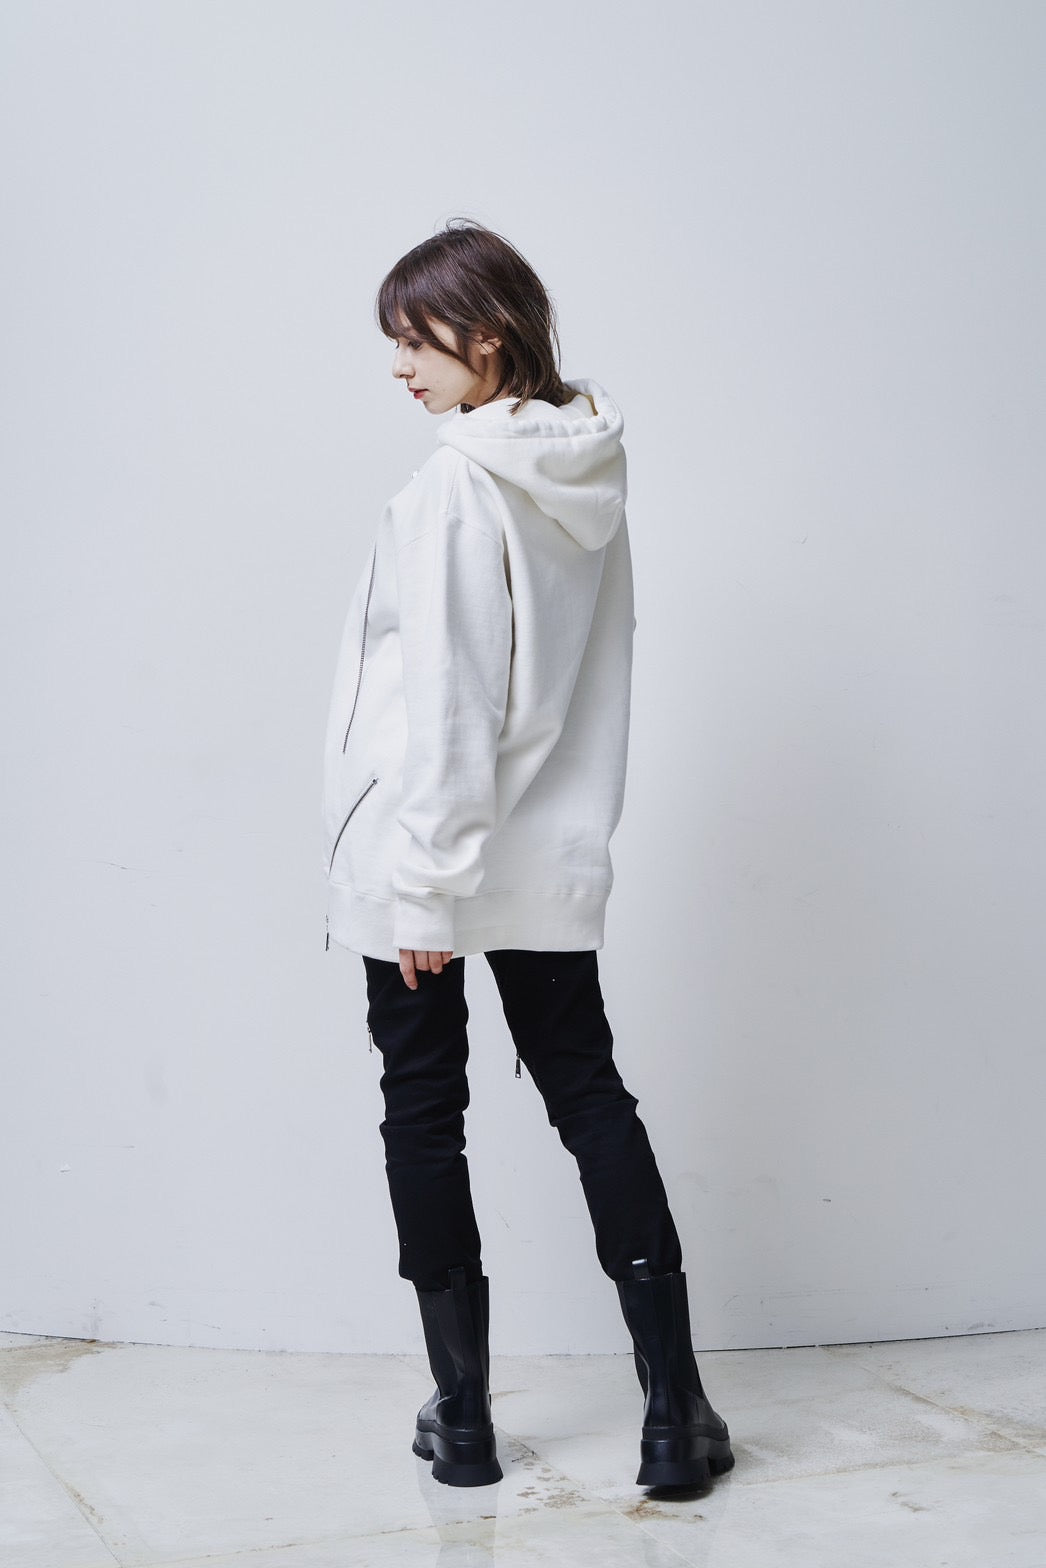 【ORDERD PRODUCT】Knee Zip Pants / WHITE [Earth Tag]